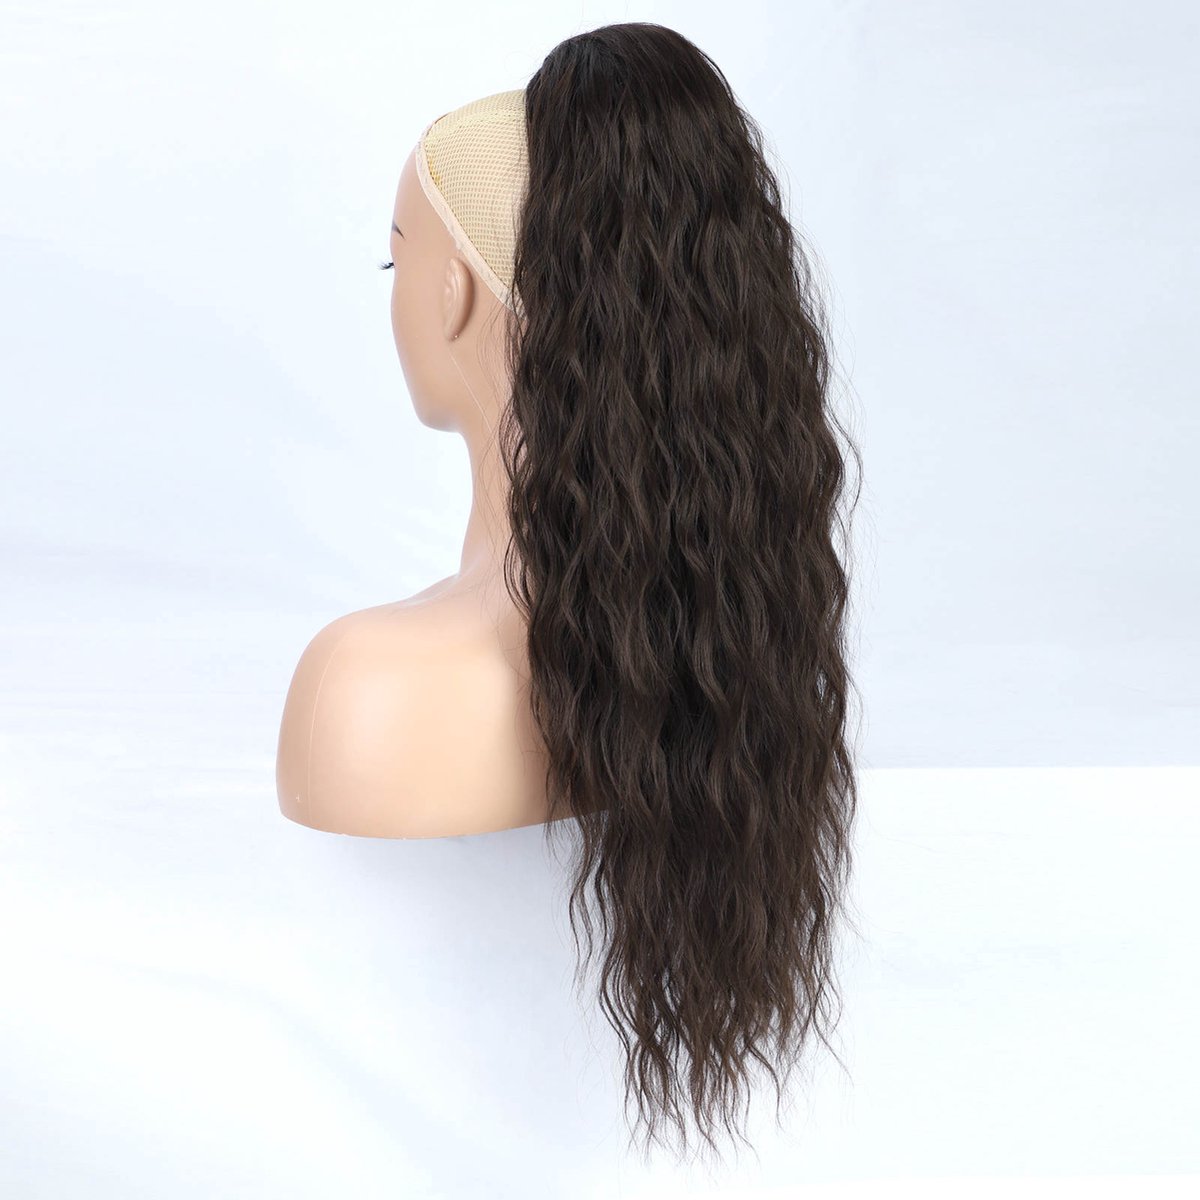 Miss Ponytails - Beachwave ponytail extentions - 26 inch - Bruin 6 - Hair extentions - Haarverlenging